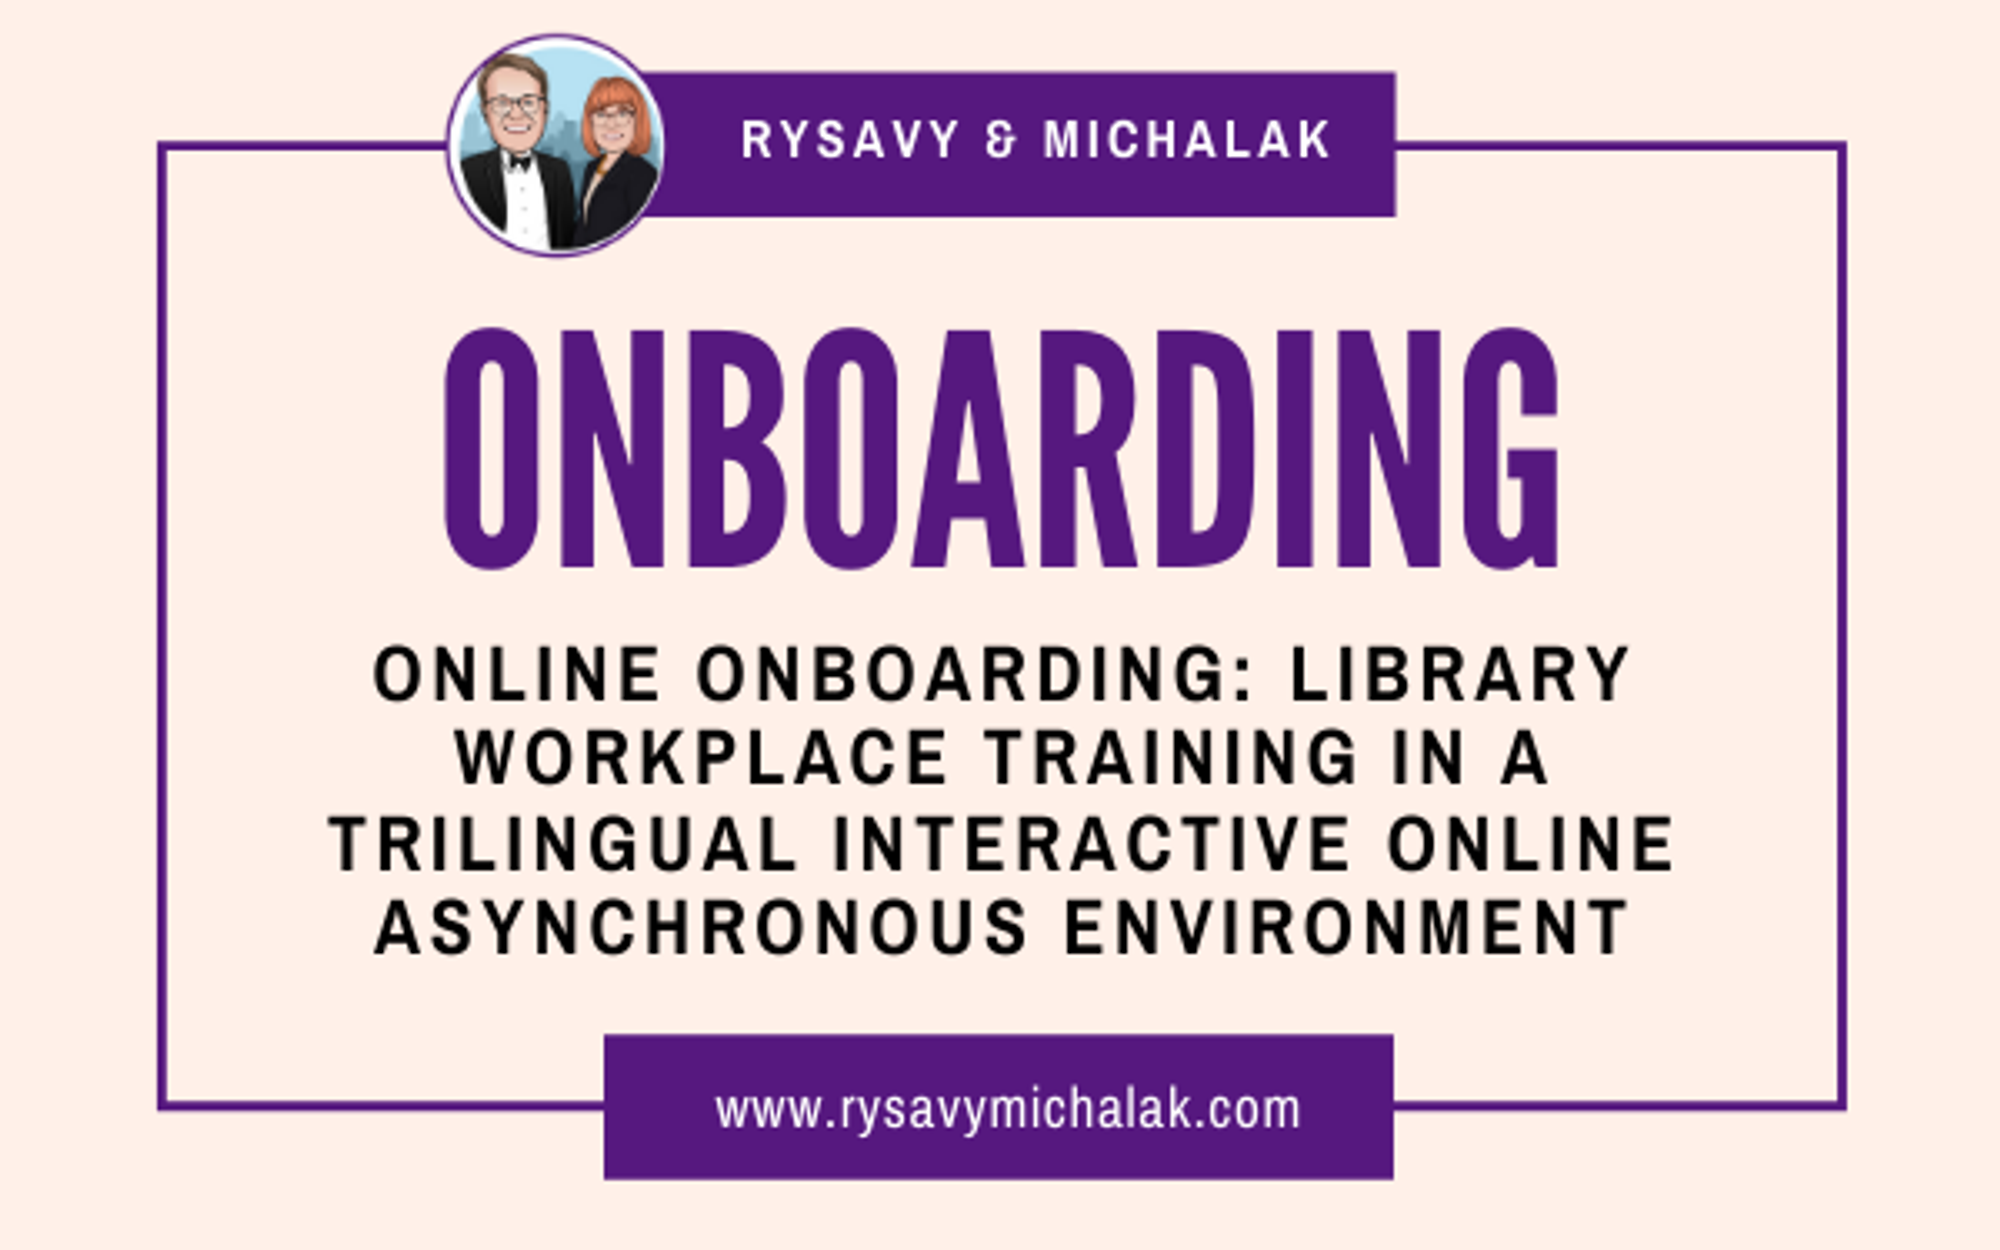 Online Onboarding: Library Workplace Training in a Trilingual Interactive Online Asynchronous Environment